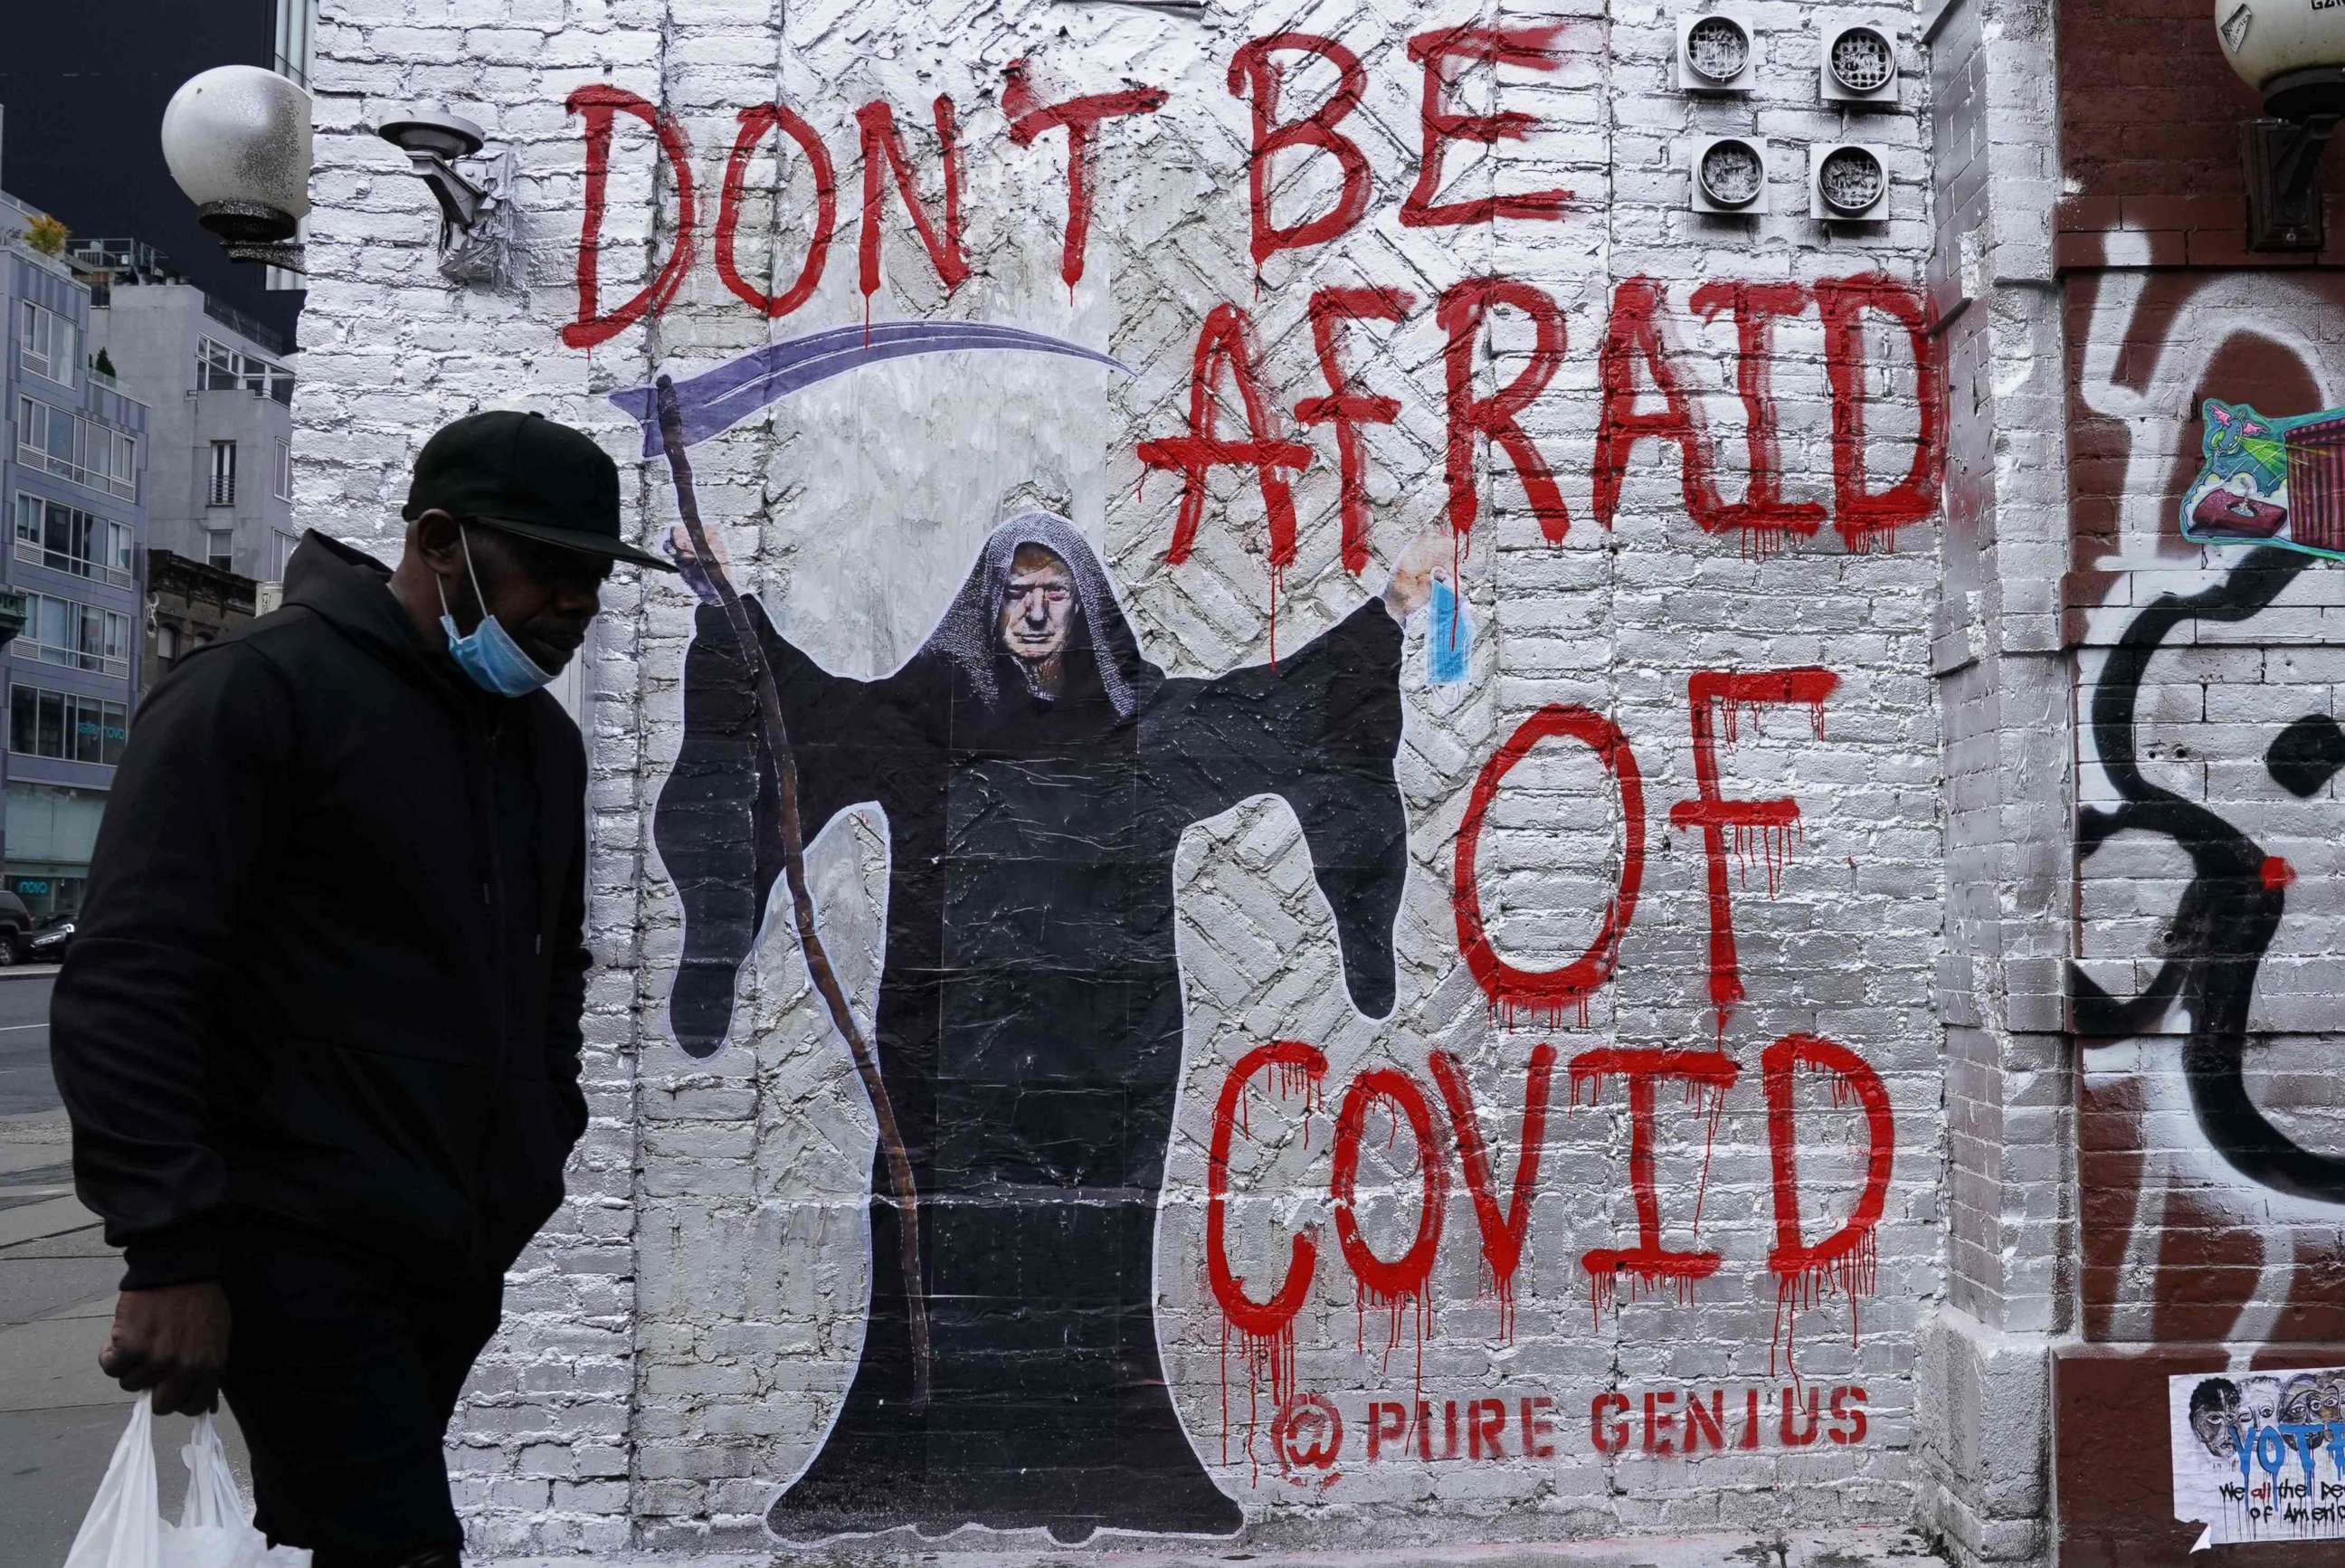 PHOTO: A man walks past a mural by the artist who goes by the name "Pure Genius" depicting U.S. President Donald Trump as the Grim Reaper on a wall on Houston Street in New York City on Oct. 20, 2020.